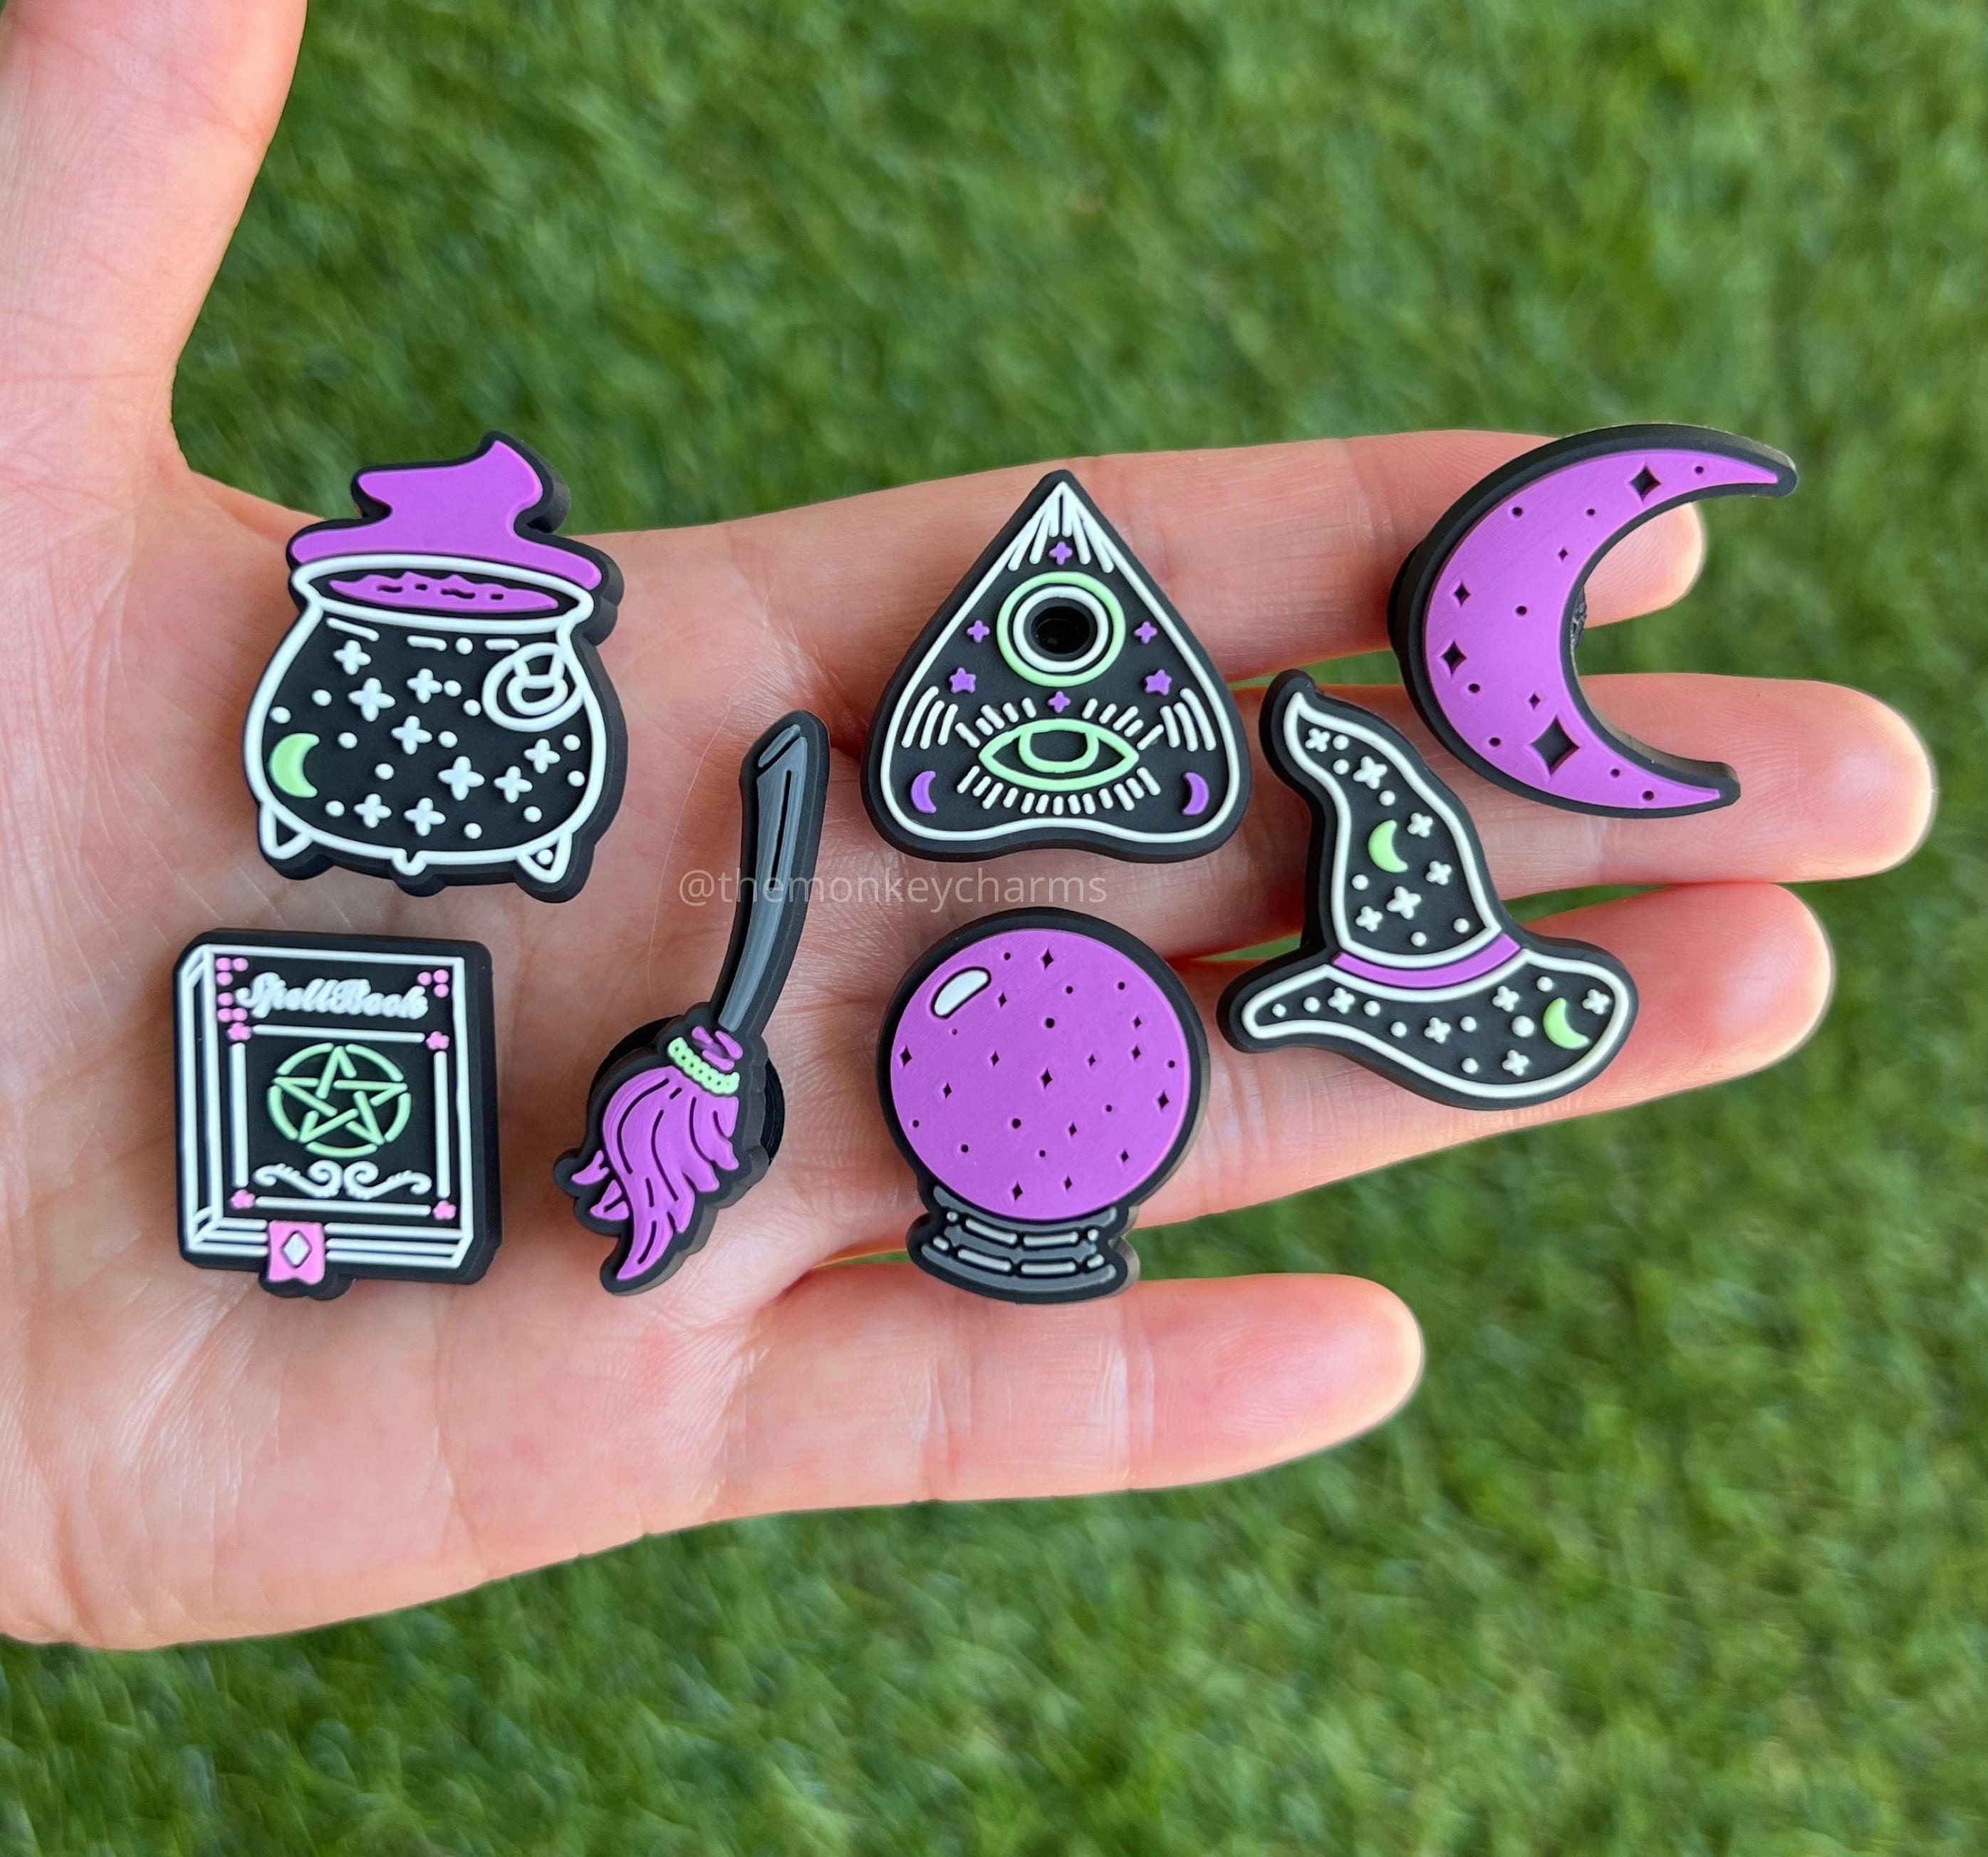 New Witchy Themed Shoe Charms For Your Crocs, Croc Compatible